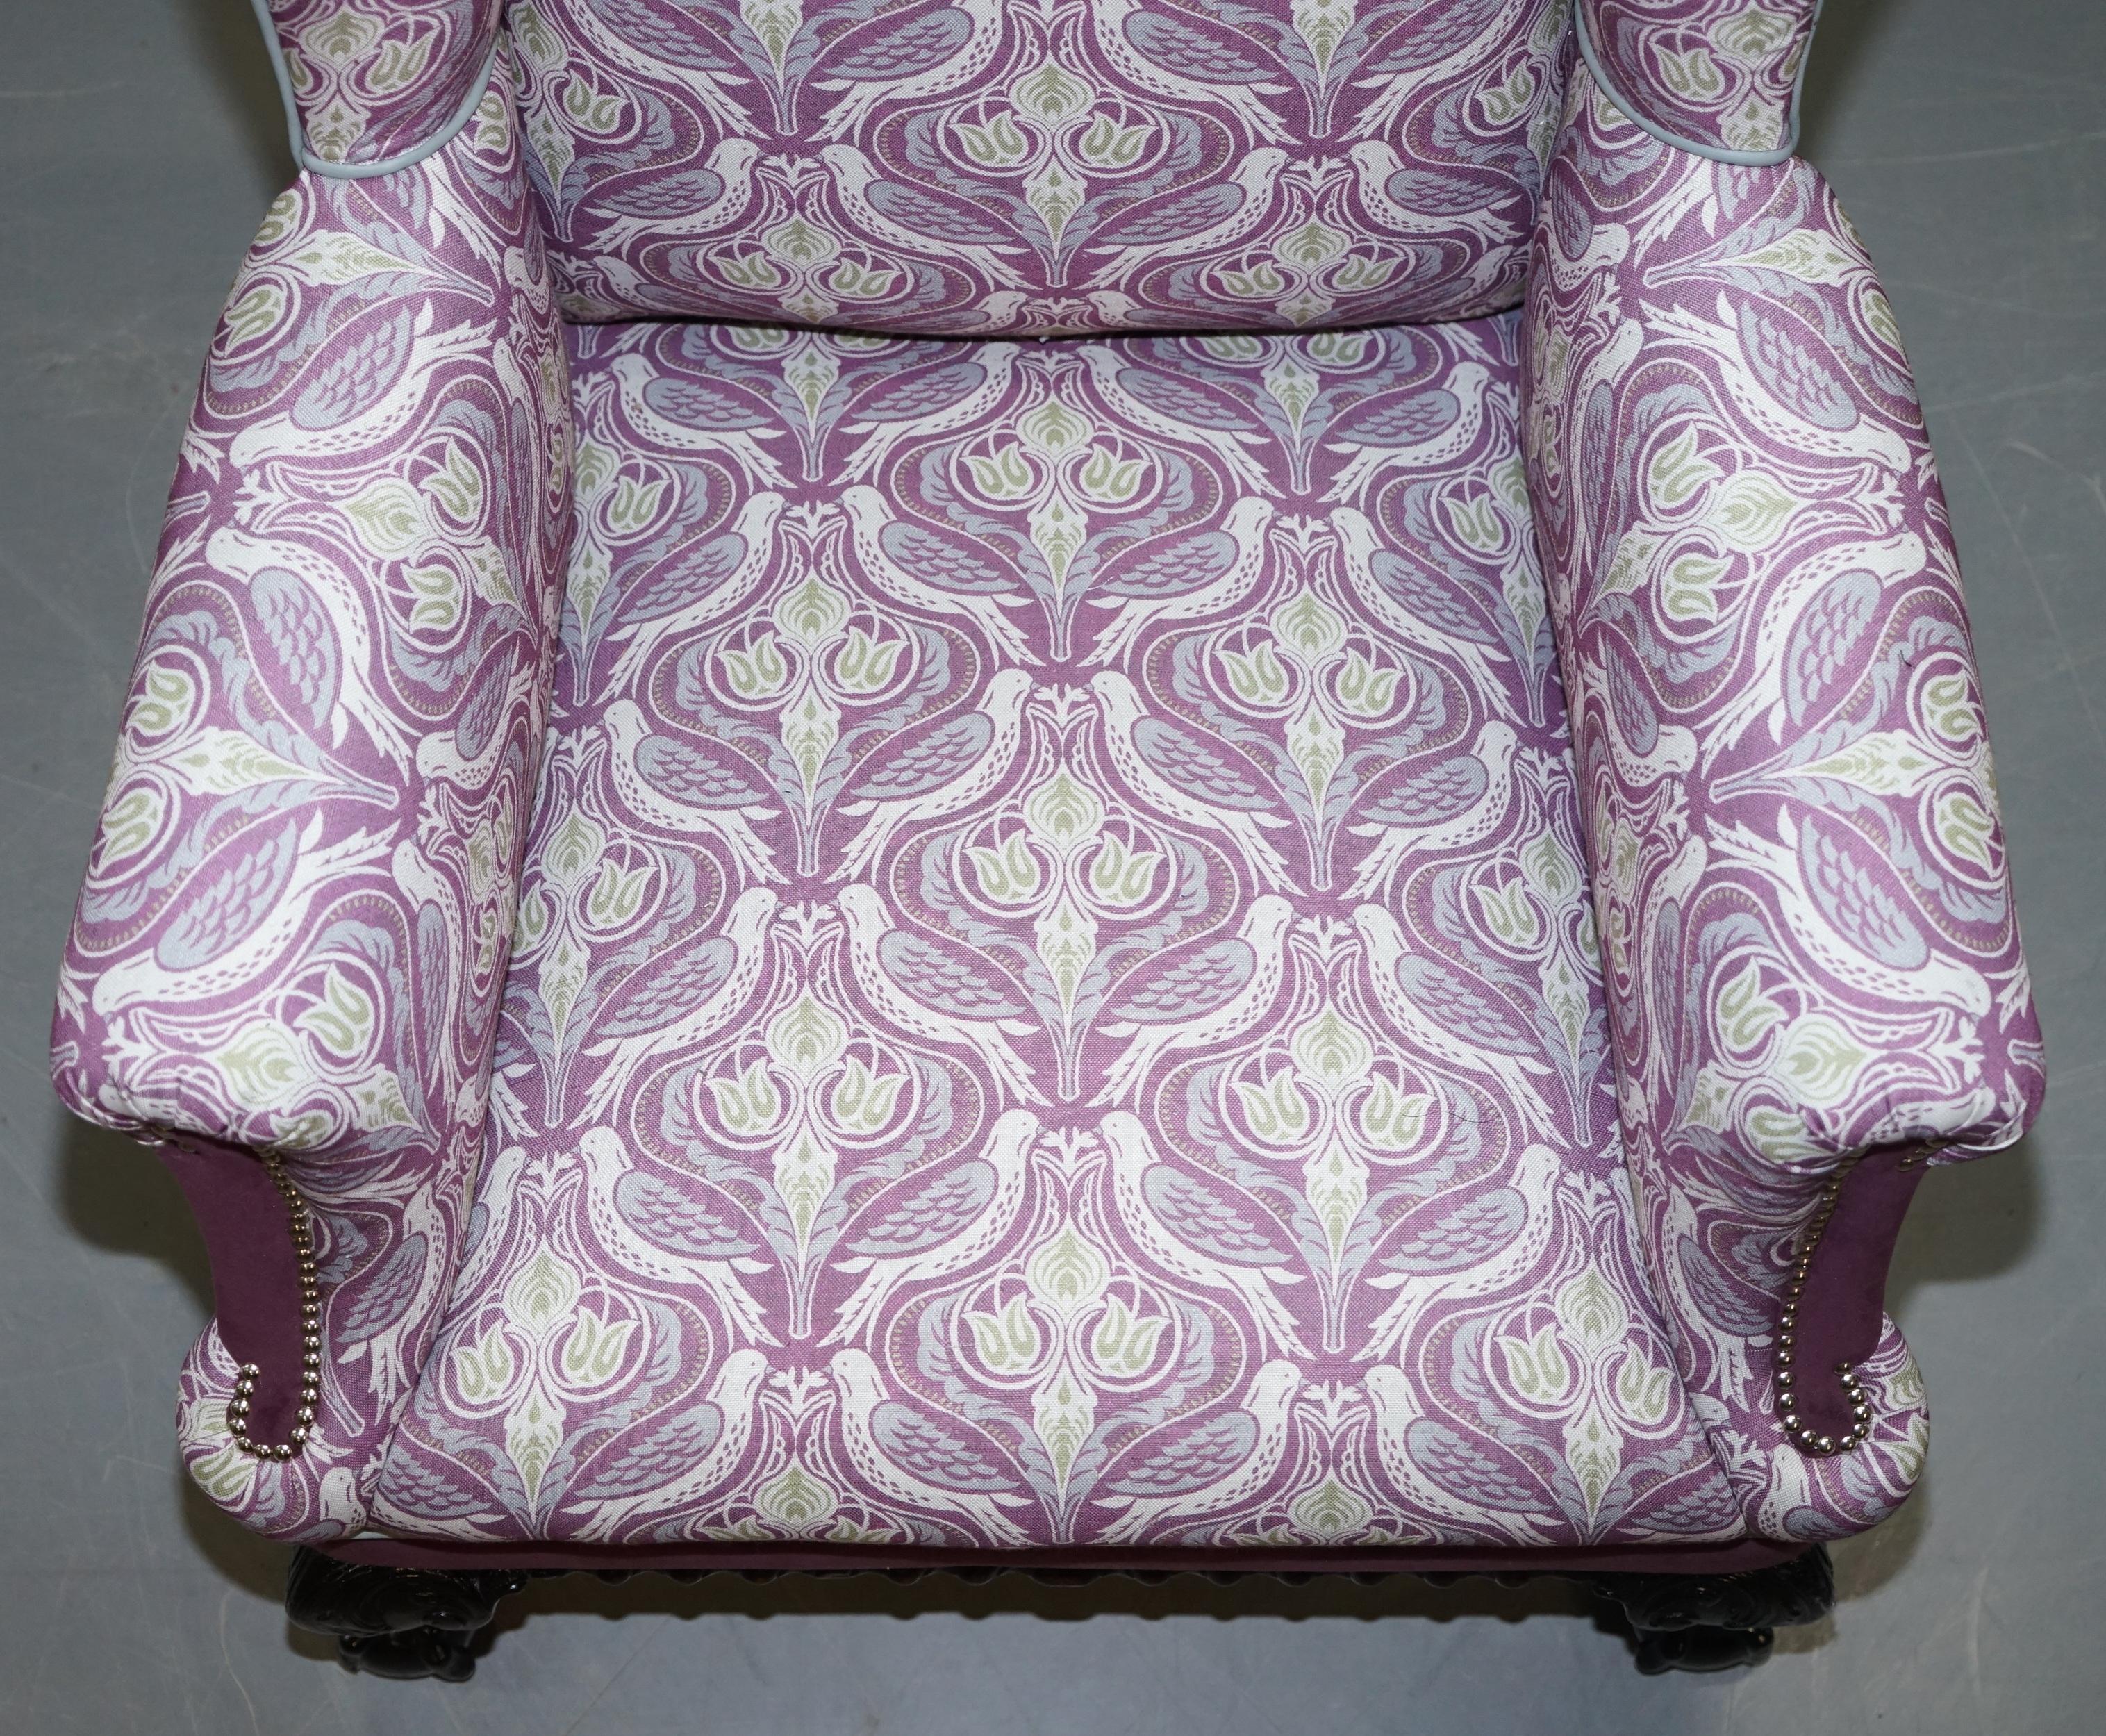 victorian wingback chair